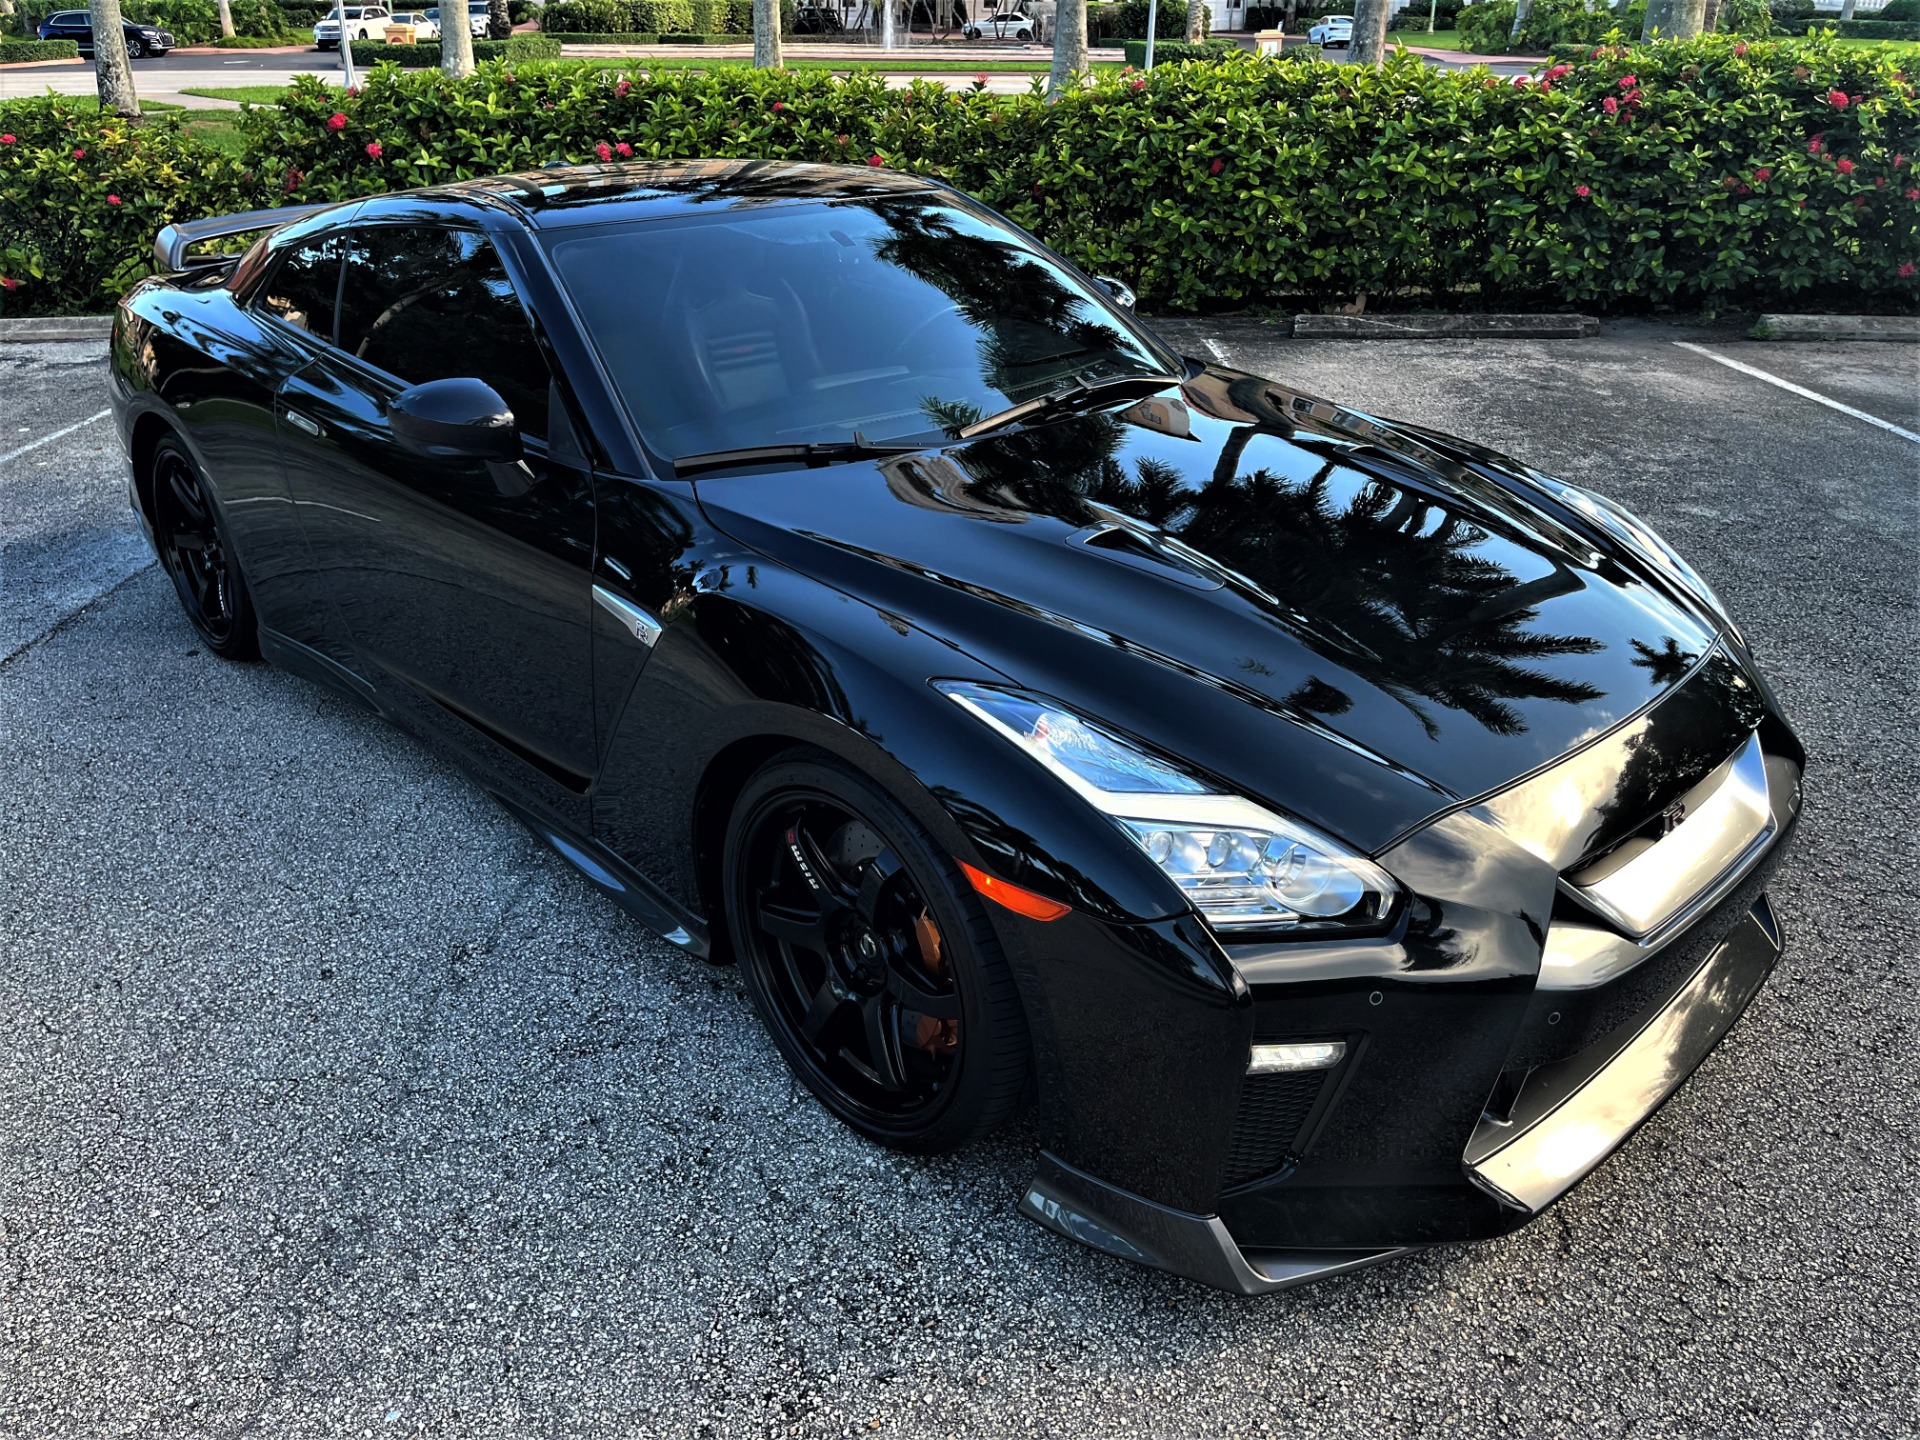 Used 2019 Nissan GT-R Track Edition for sale $129,850 at The Gables Sports Cars in Miami FL 33146 3